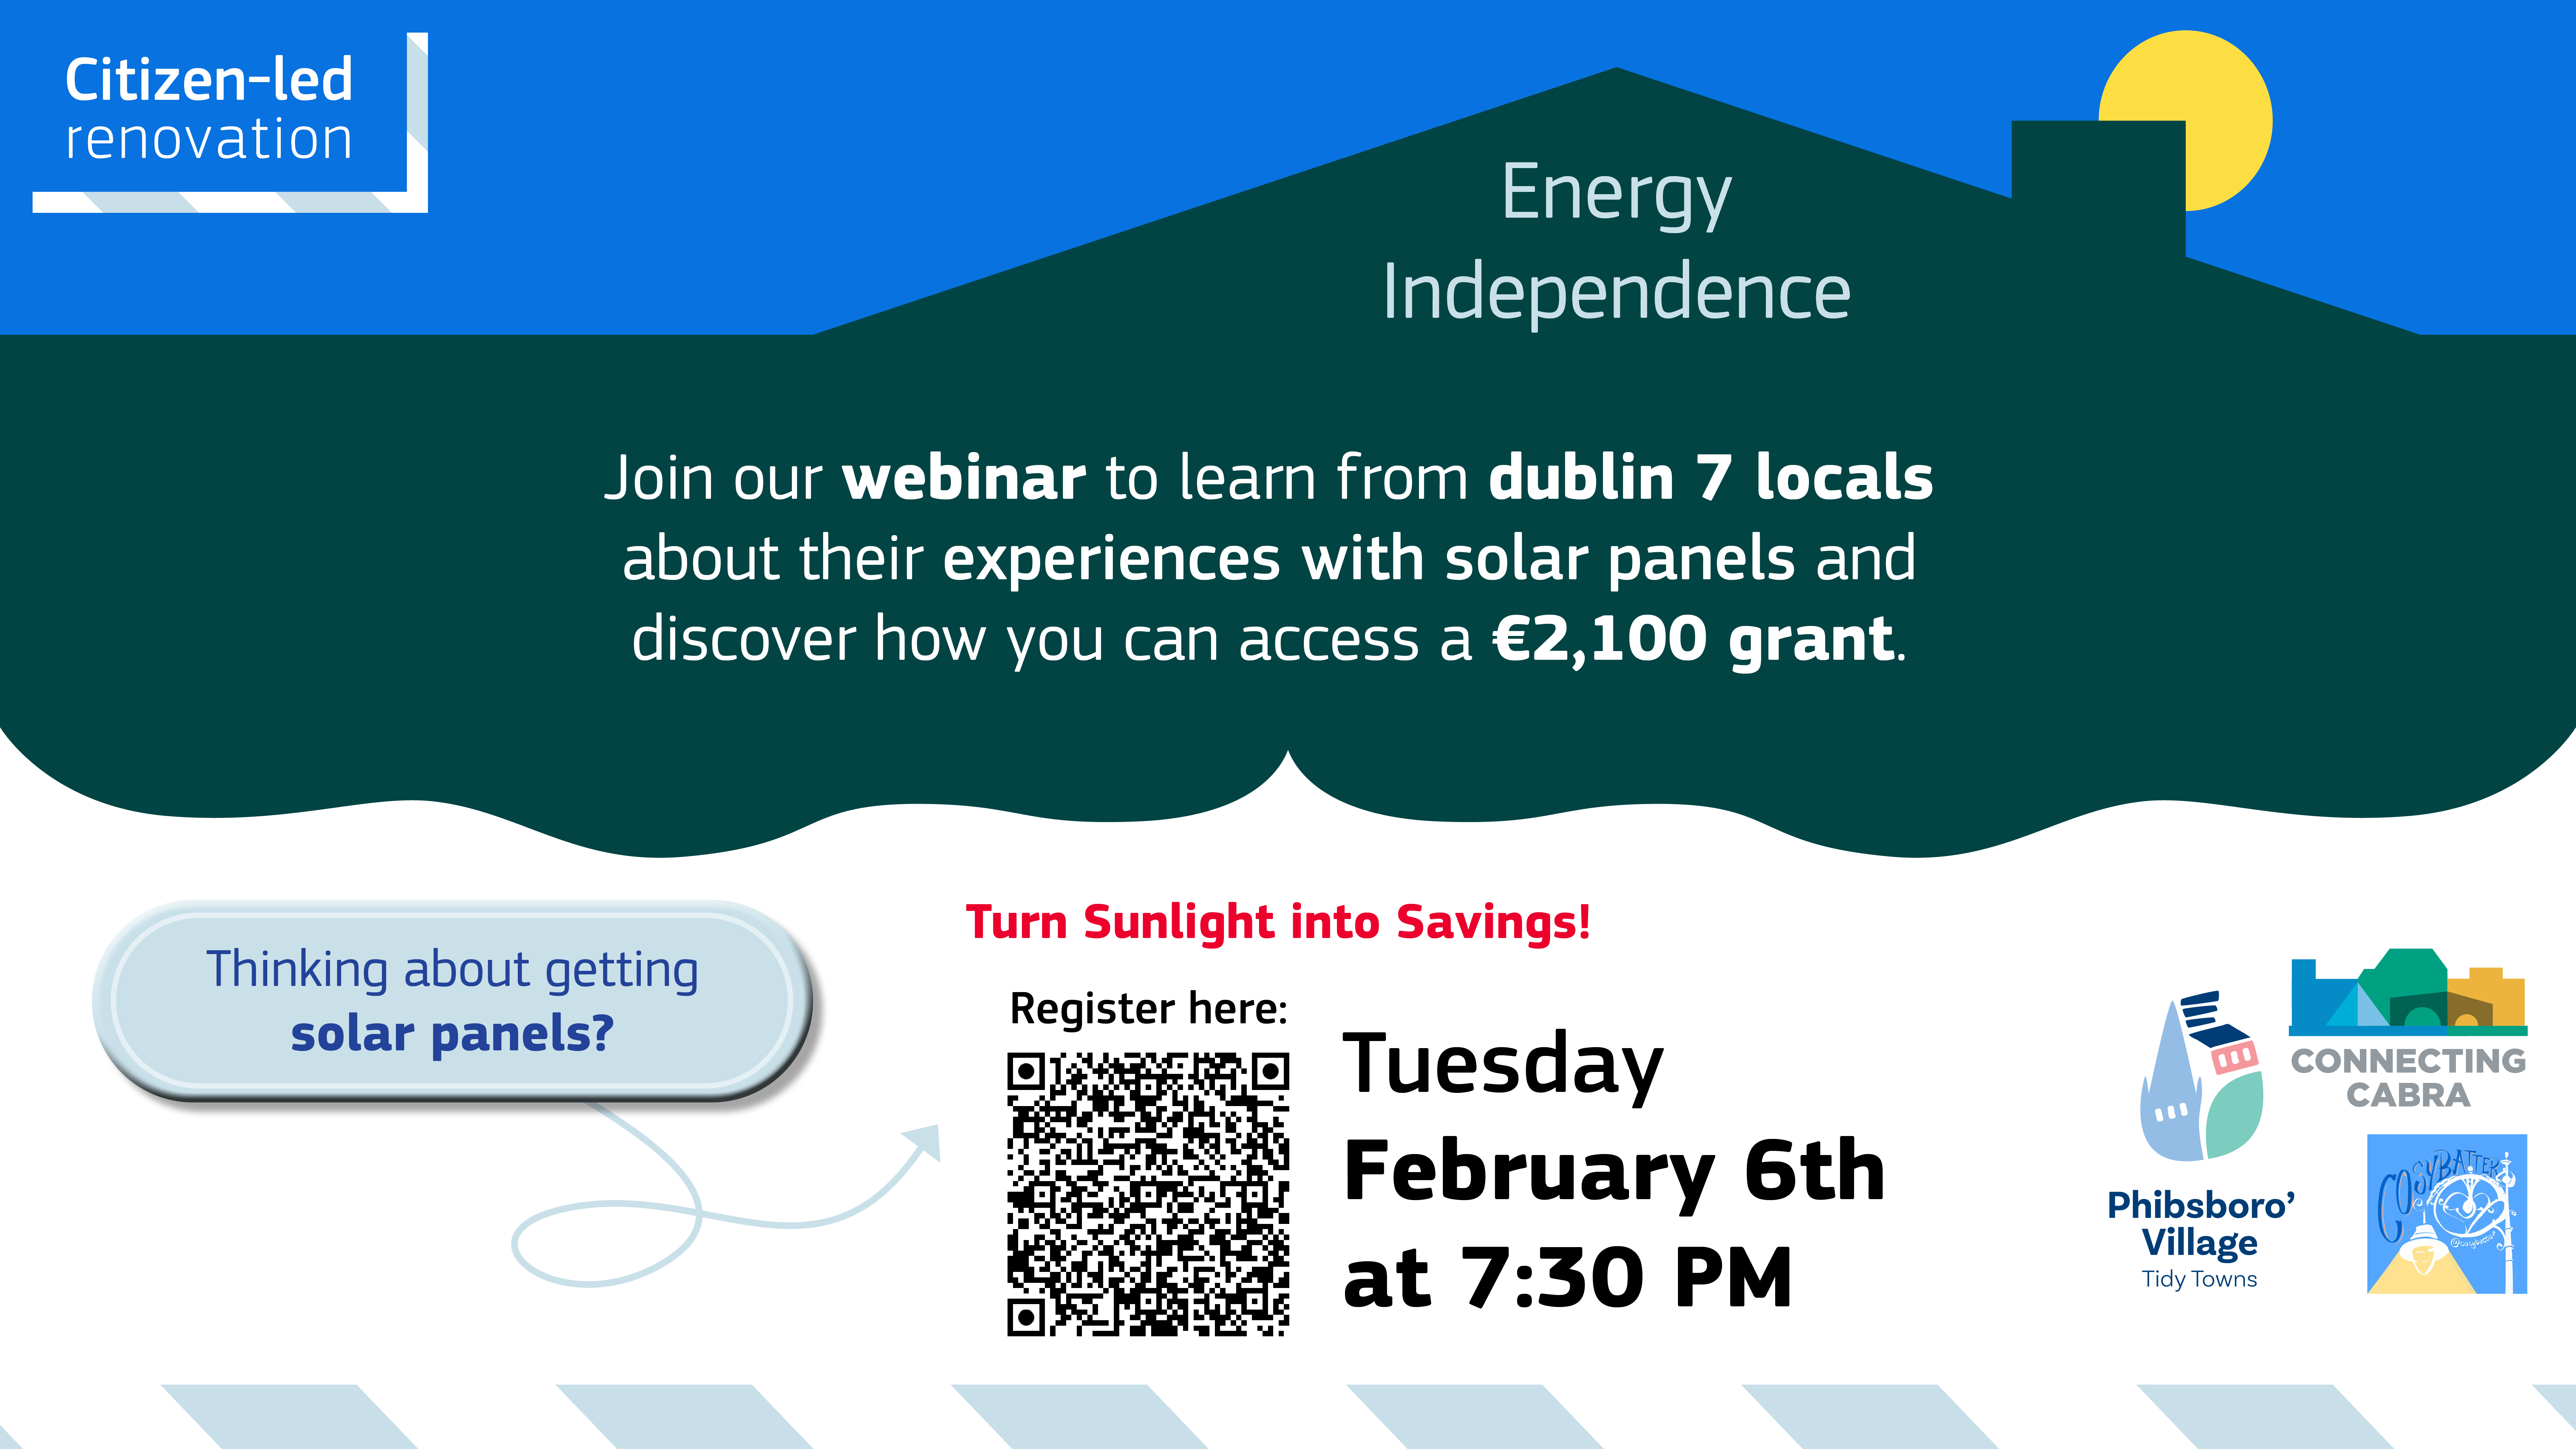 Online event on solar panels, 6th of February